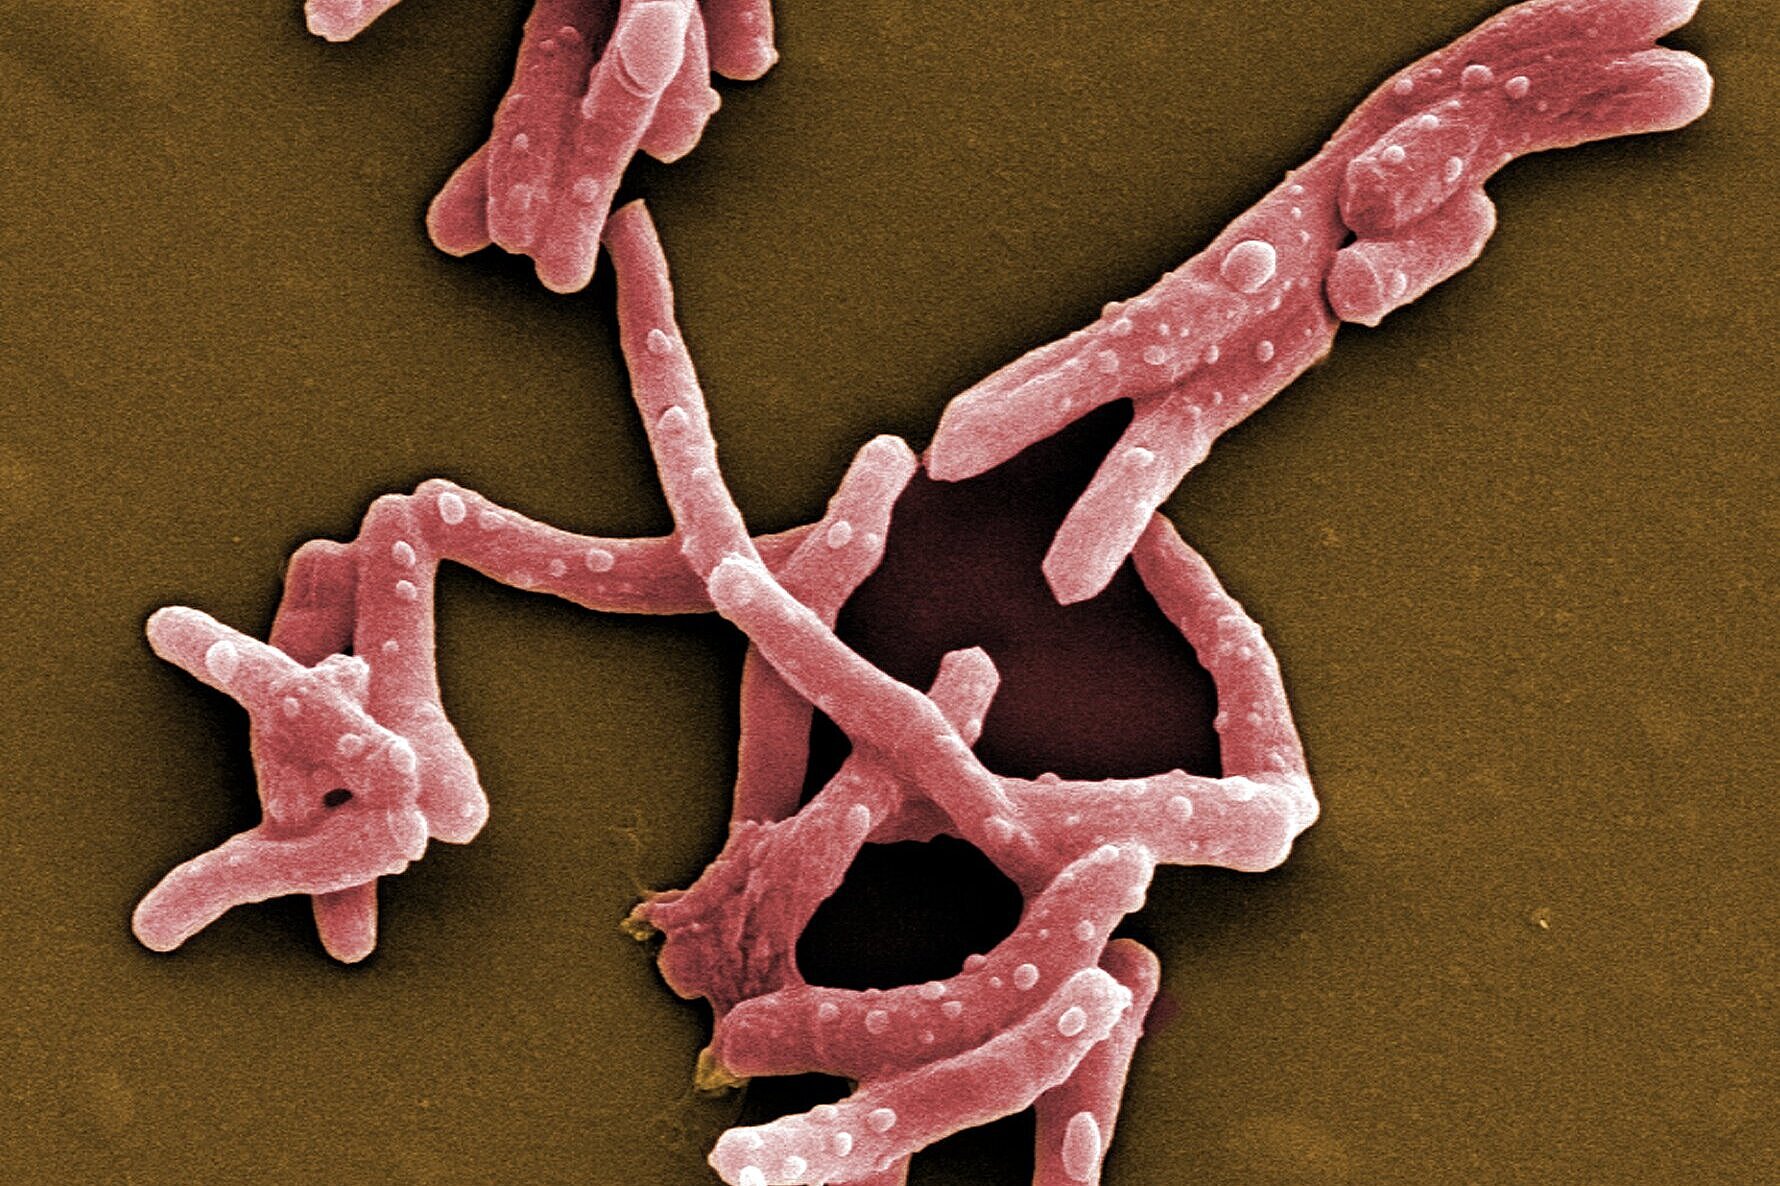 Scanning electron microscope image of Mycobacterium tuberculosis.